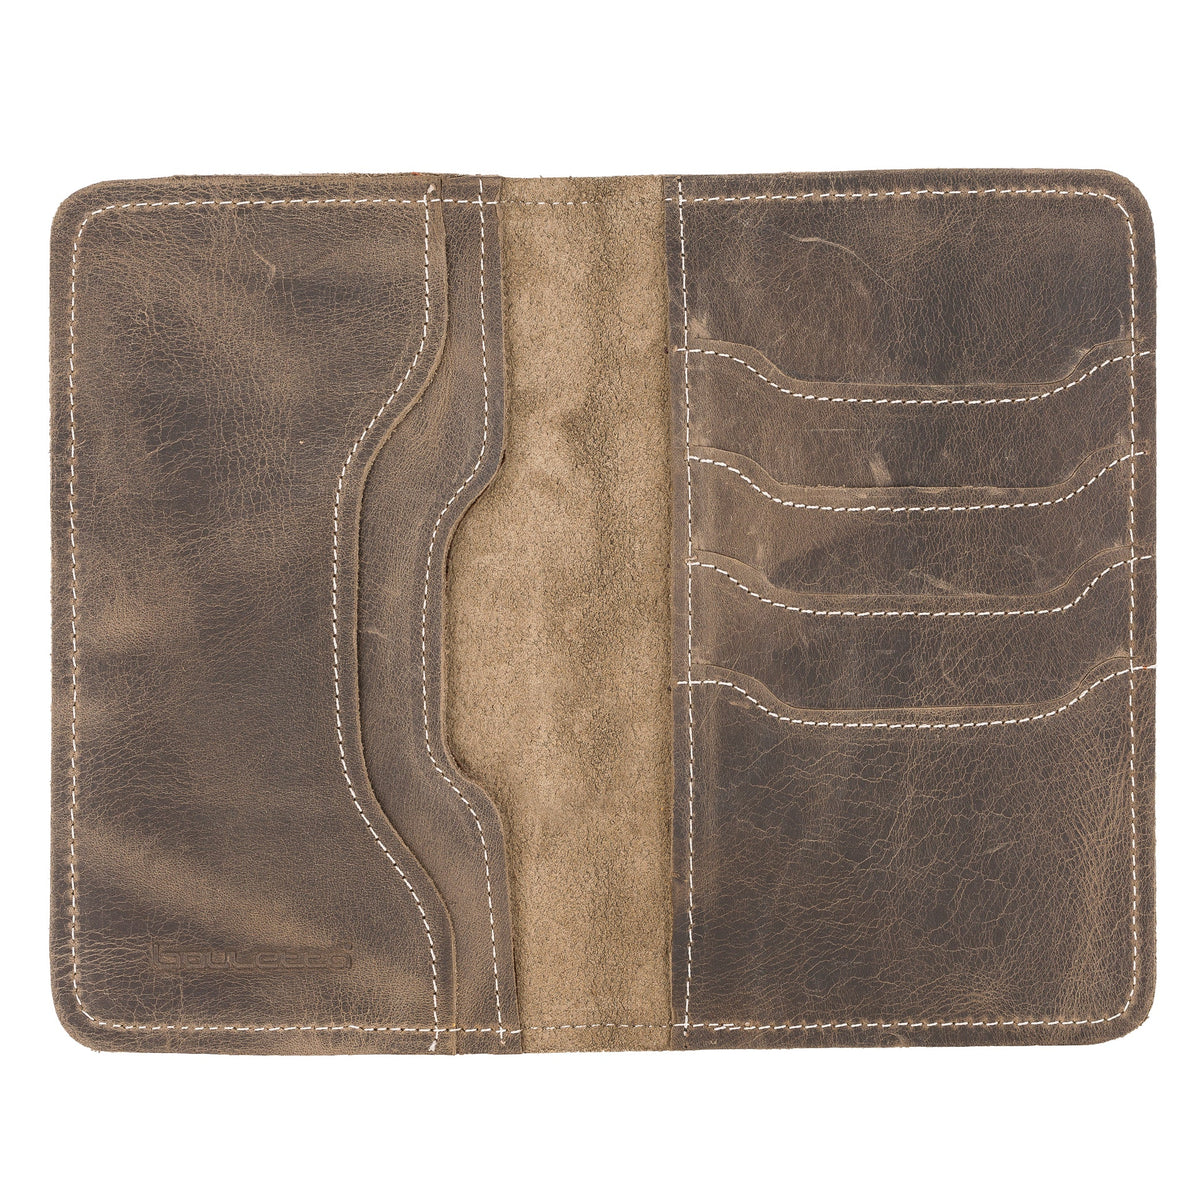 Passport Cover with Leather Wallet, 4 Card Windows, Antique Brown